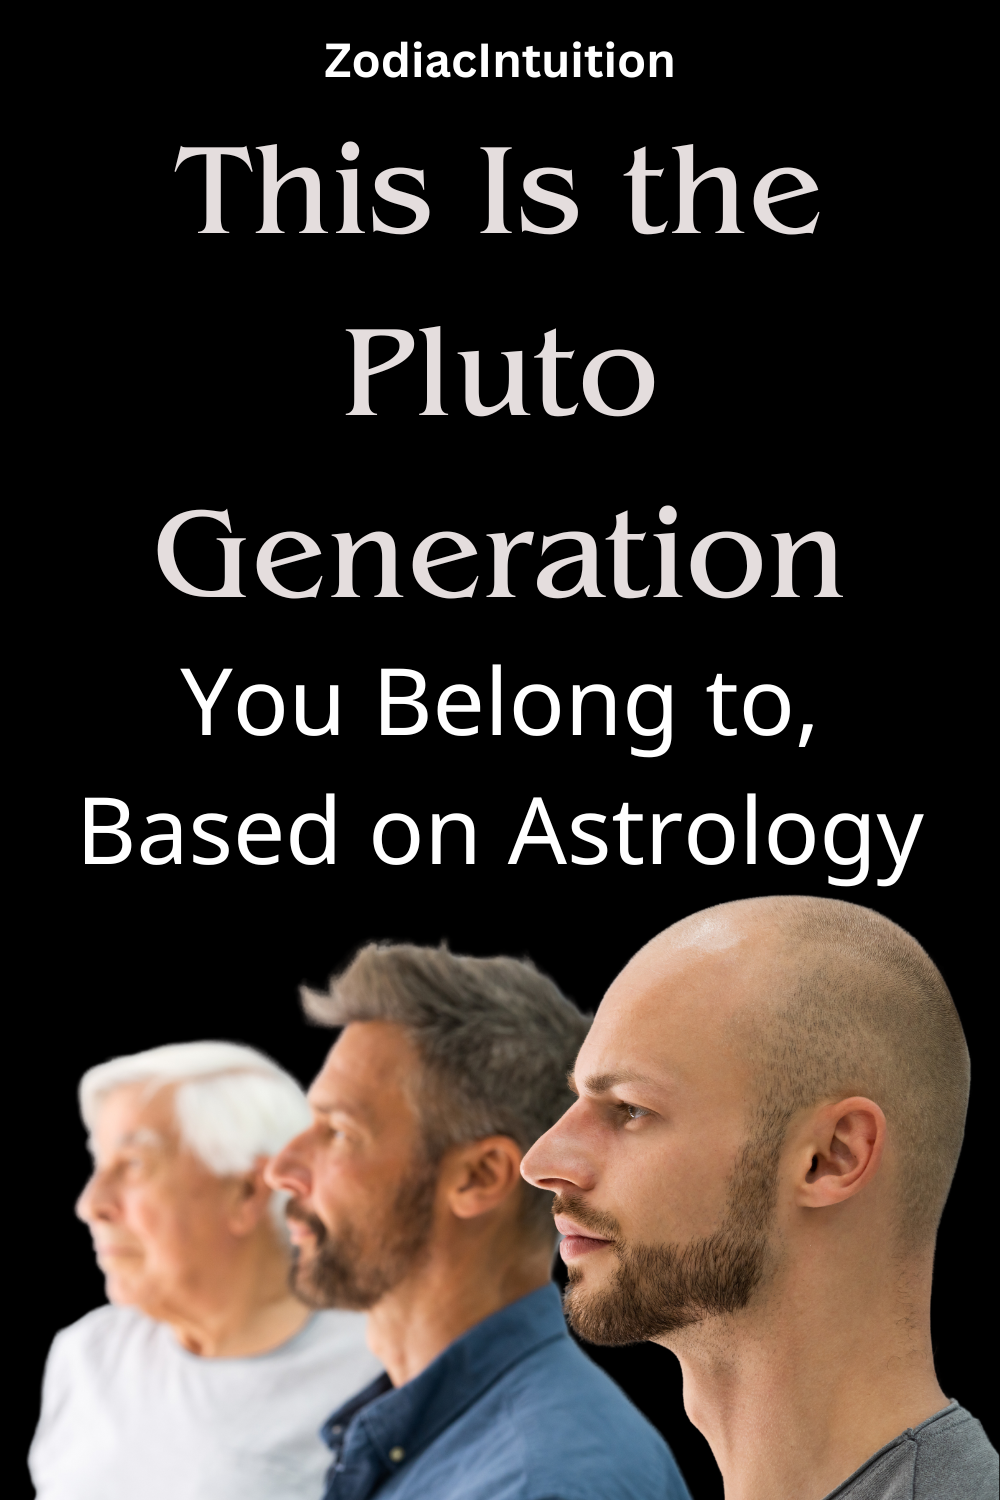 This Is the Pluto Generation You Belong to, Based on Astrology